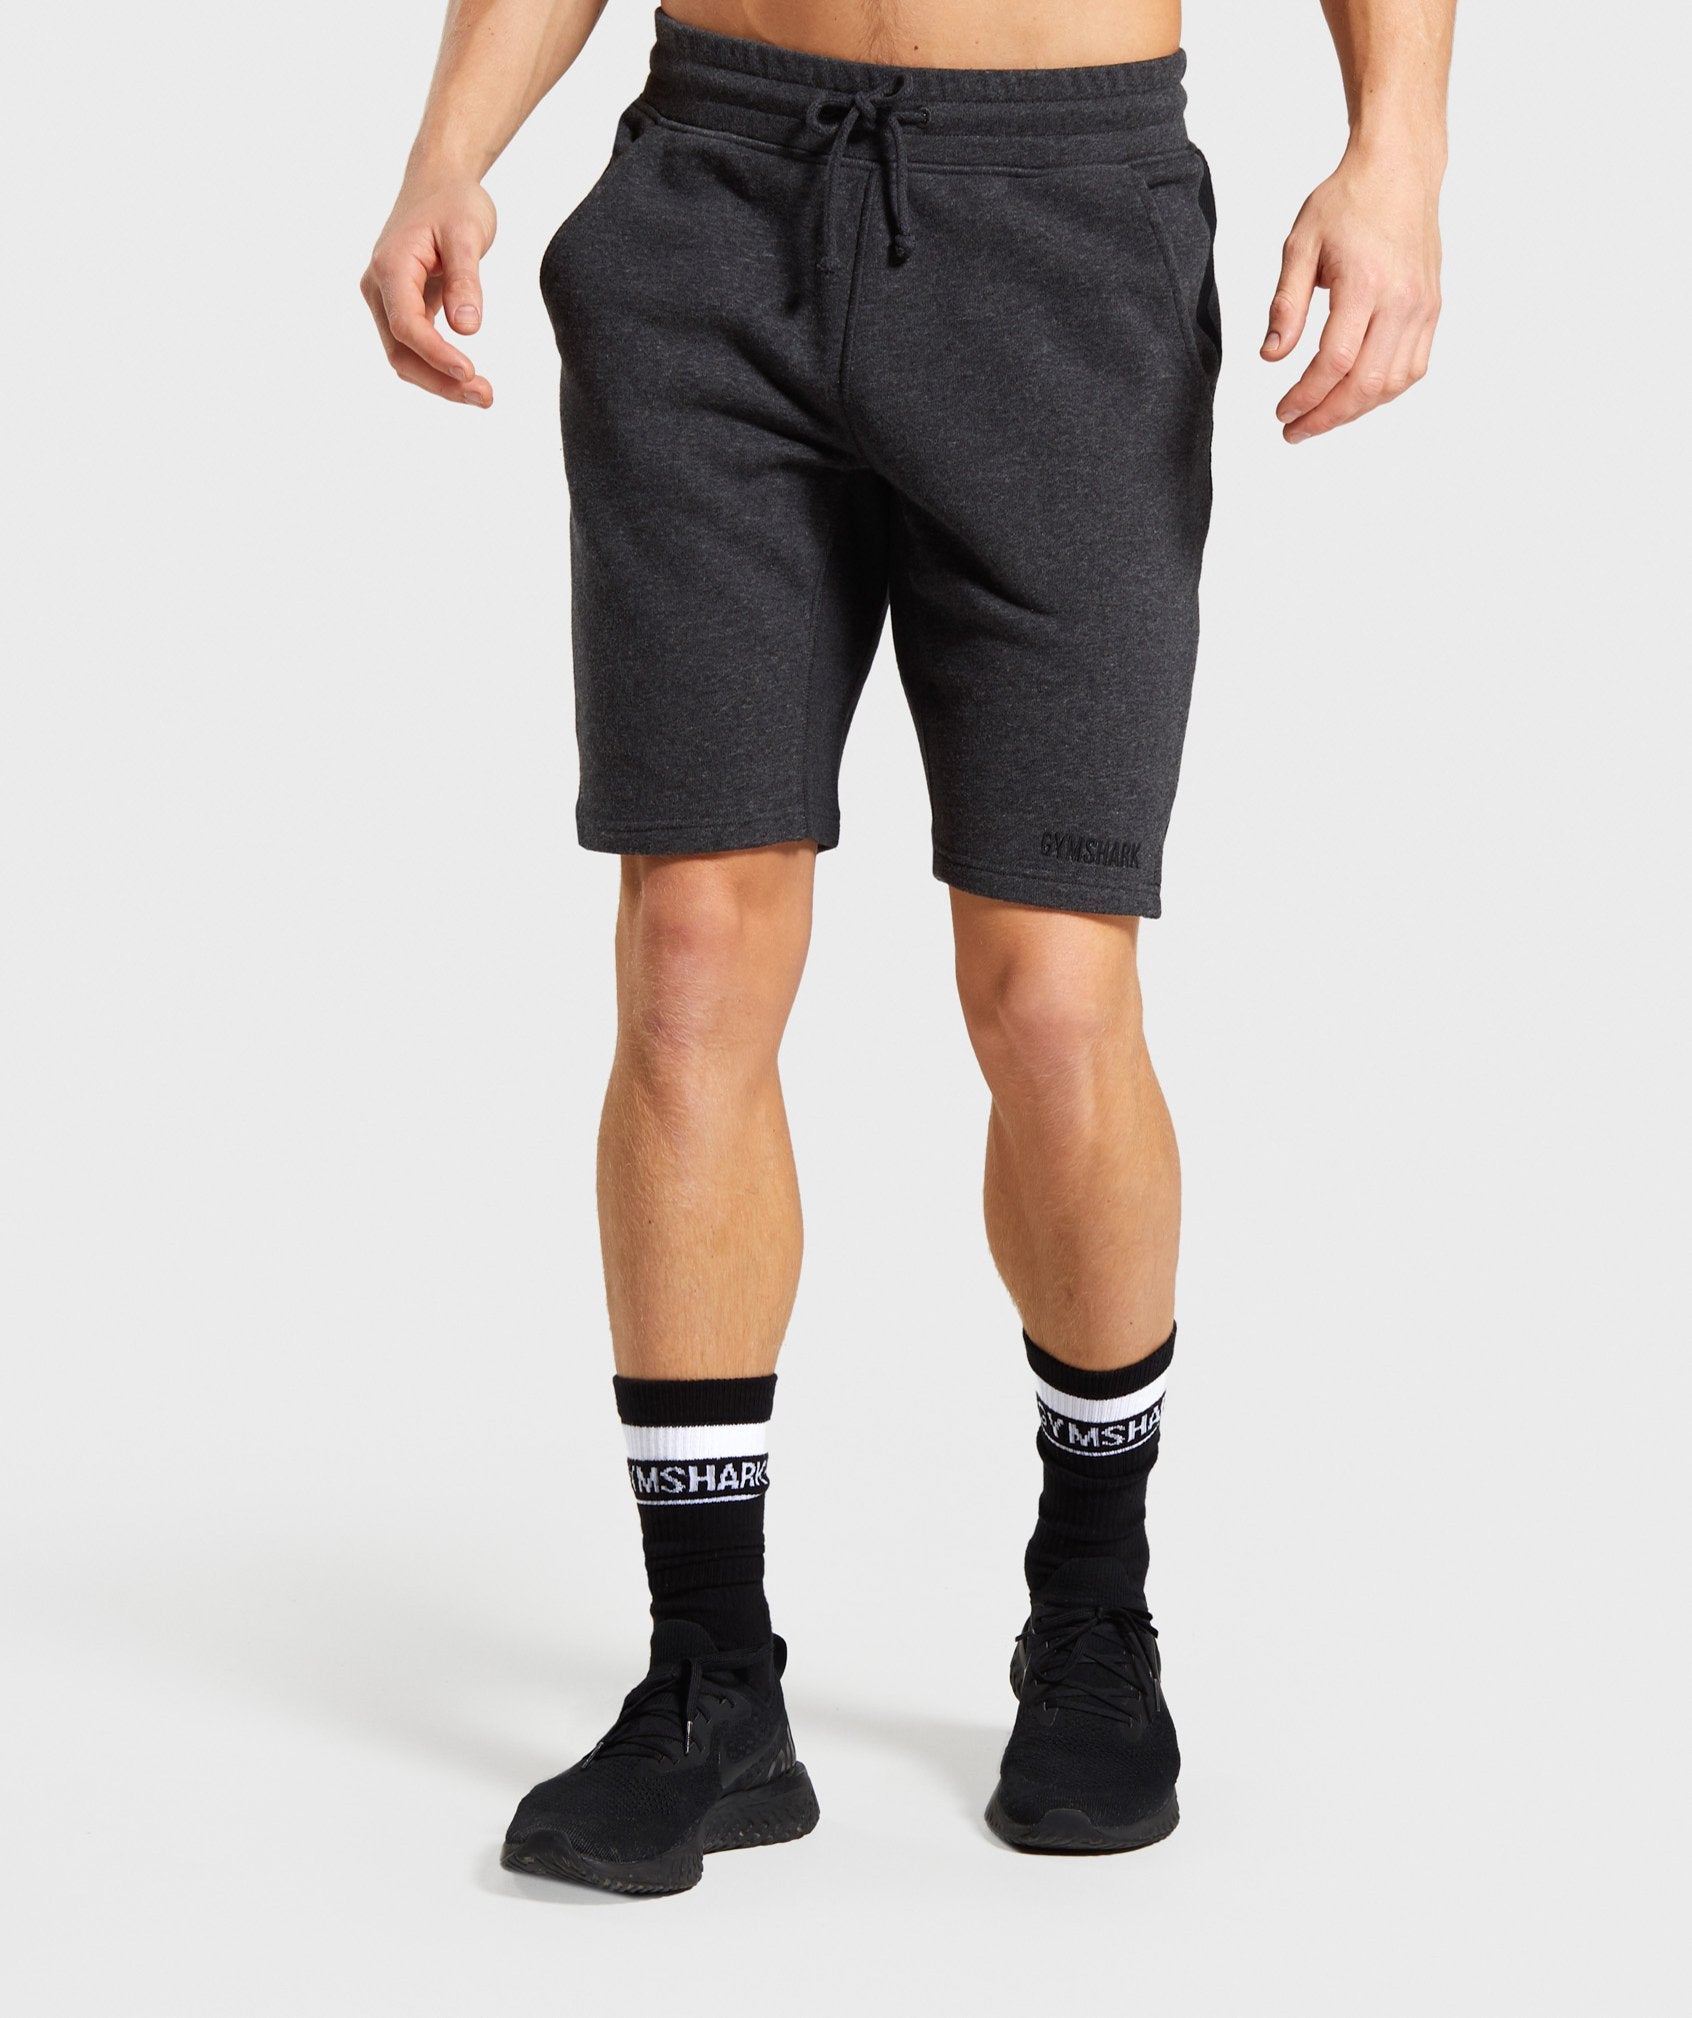 Compound Shorts in Black Marl - view 1